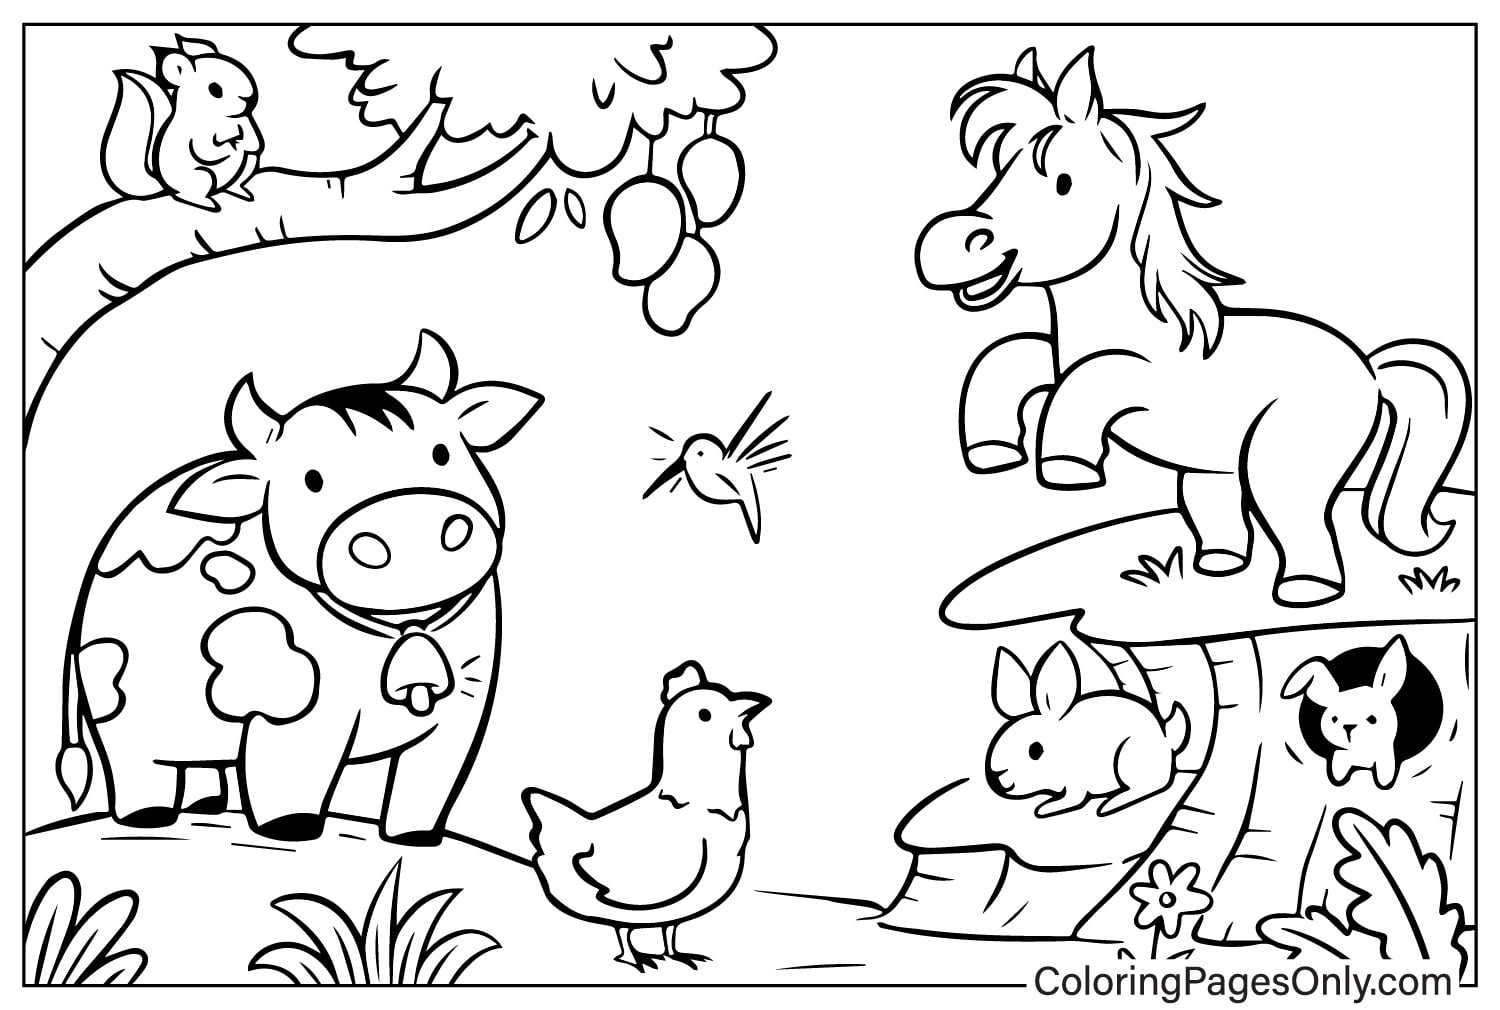 Cow and Horse Doodle Farm Animals Coloring Page